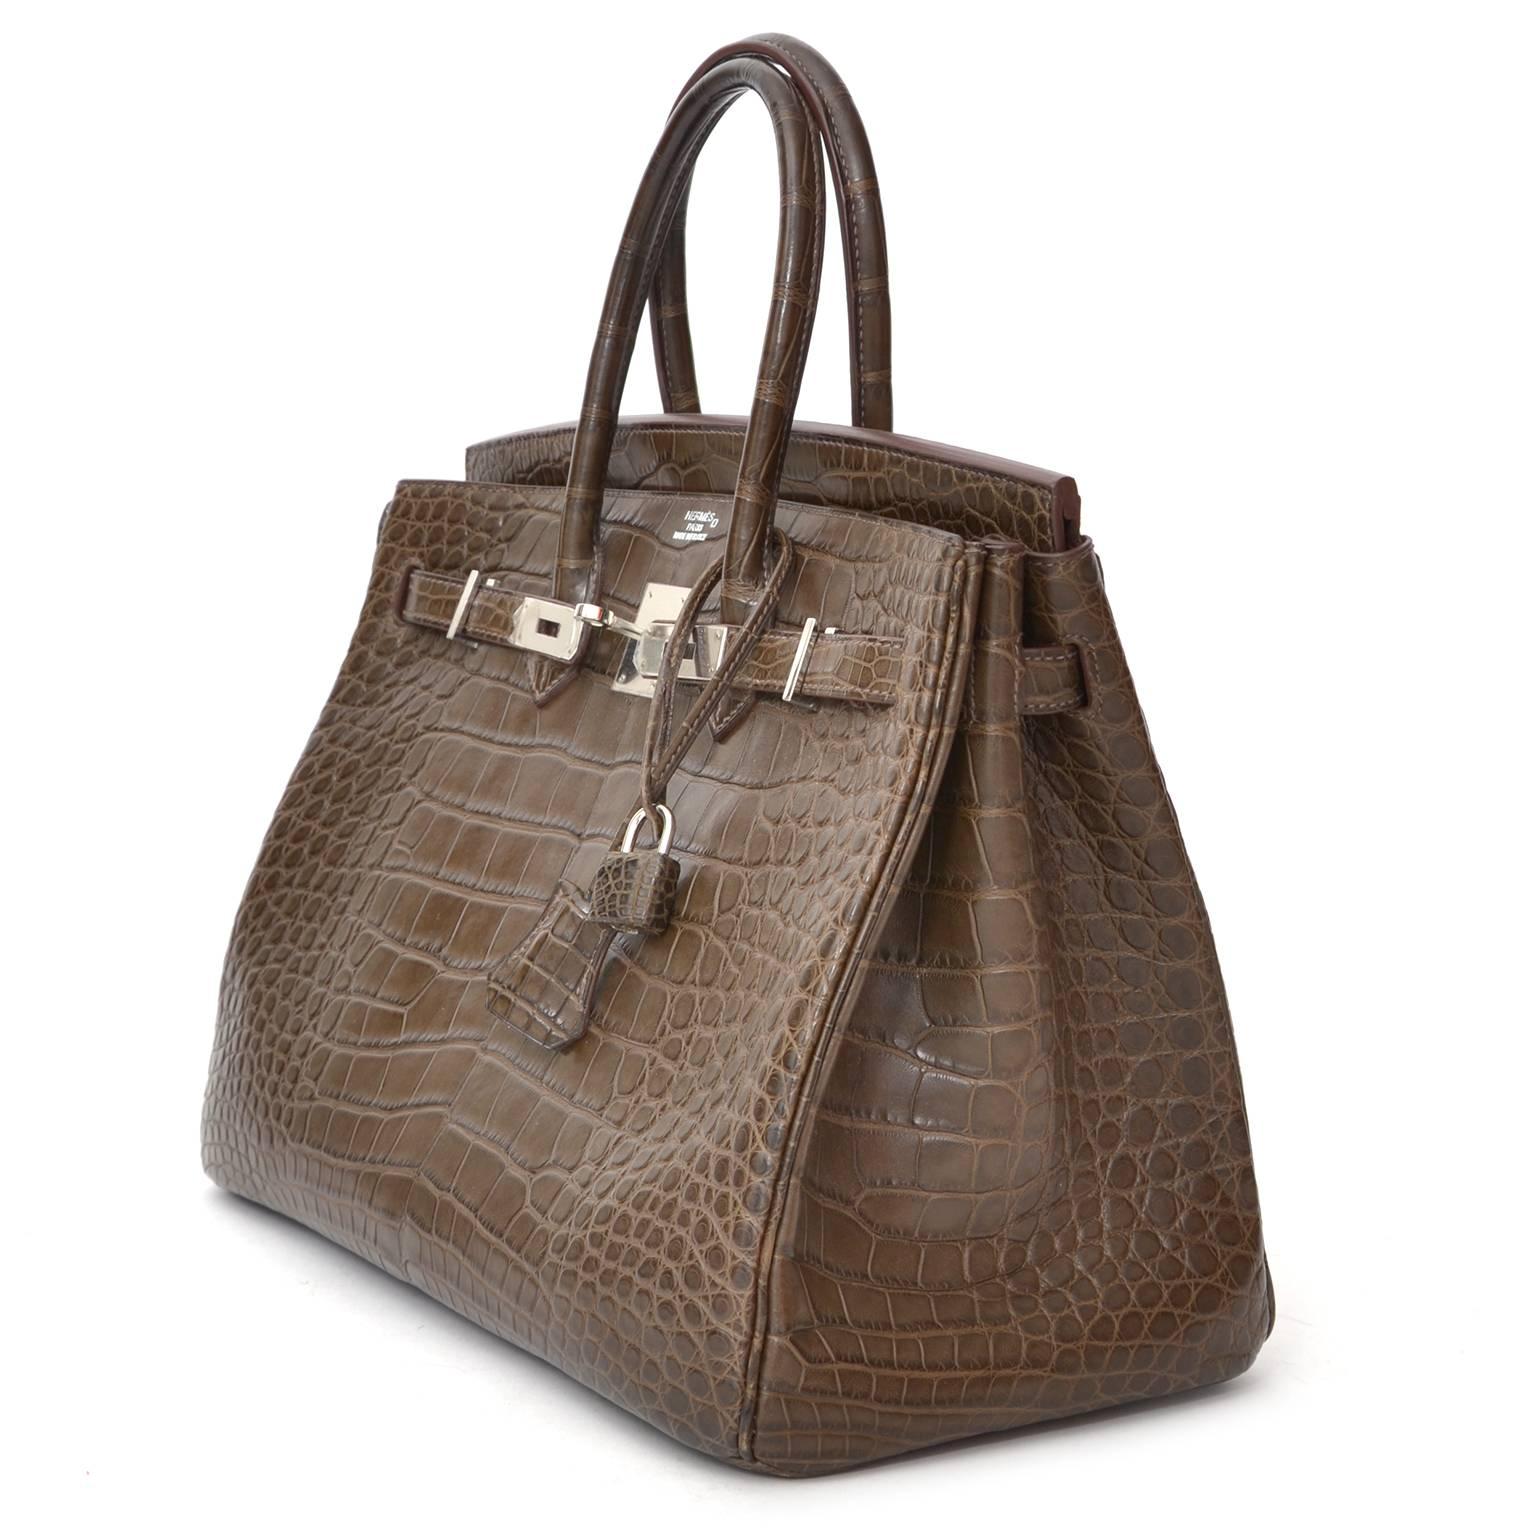 Hermes Birkin 35Cm In The Most Beautiful Crocodile Alligator Matte Gris Elephant With palladium hardware.

One of the most amazing colors. Neutral Olive Shade With A Silvery Sheen.
The Color Is Simply Devine Depending On What You Are Wearing &